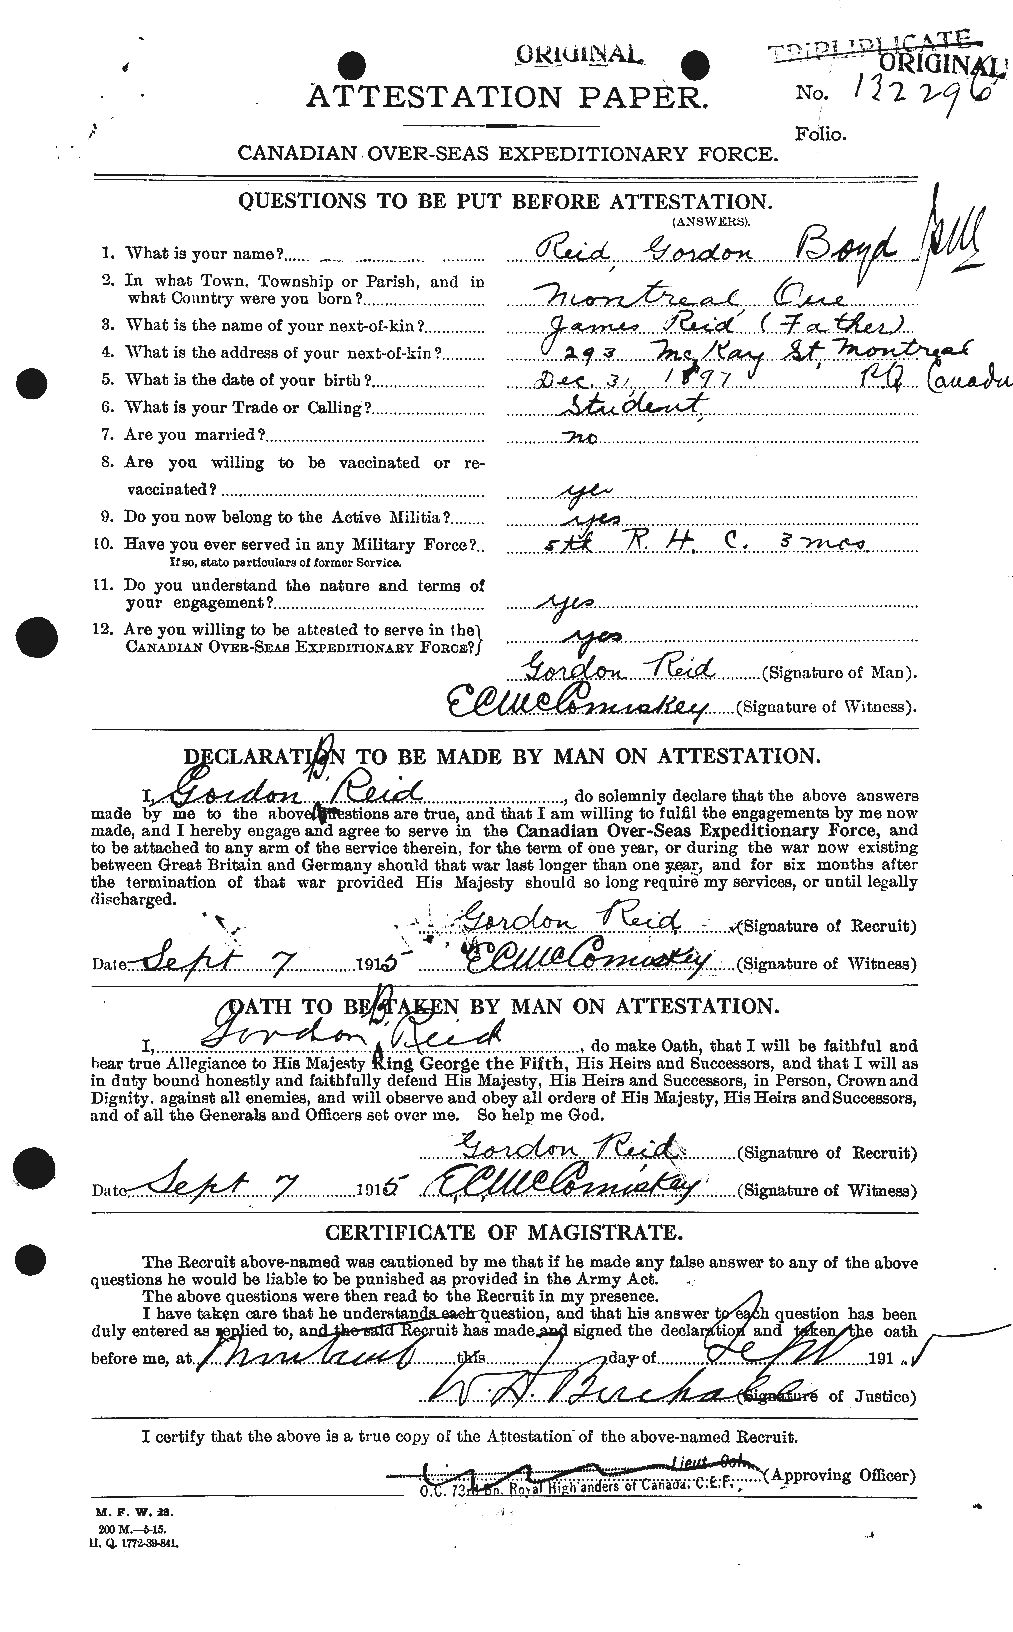 Personnel Records of the First World War - CEF 598558a